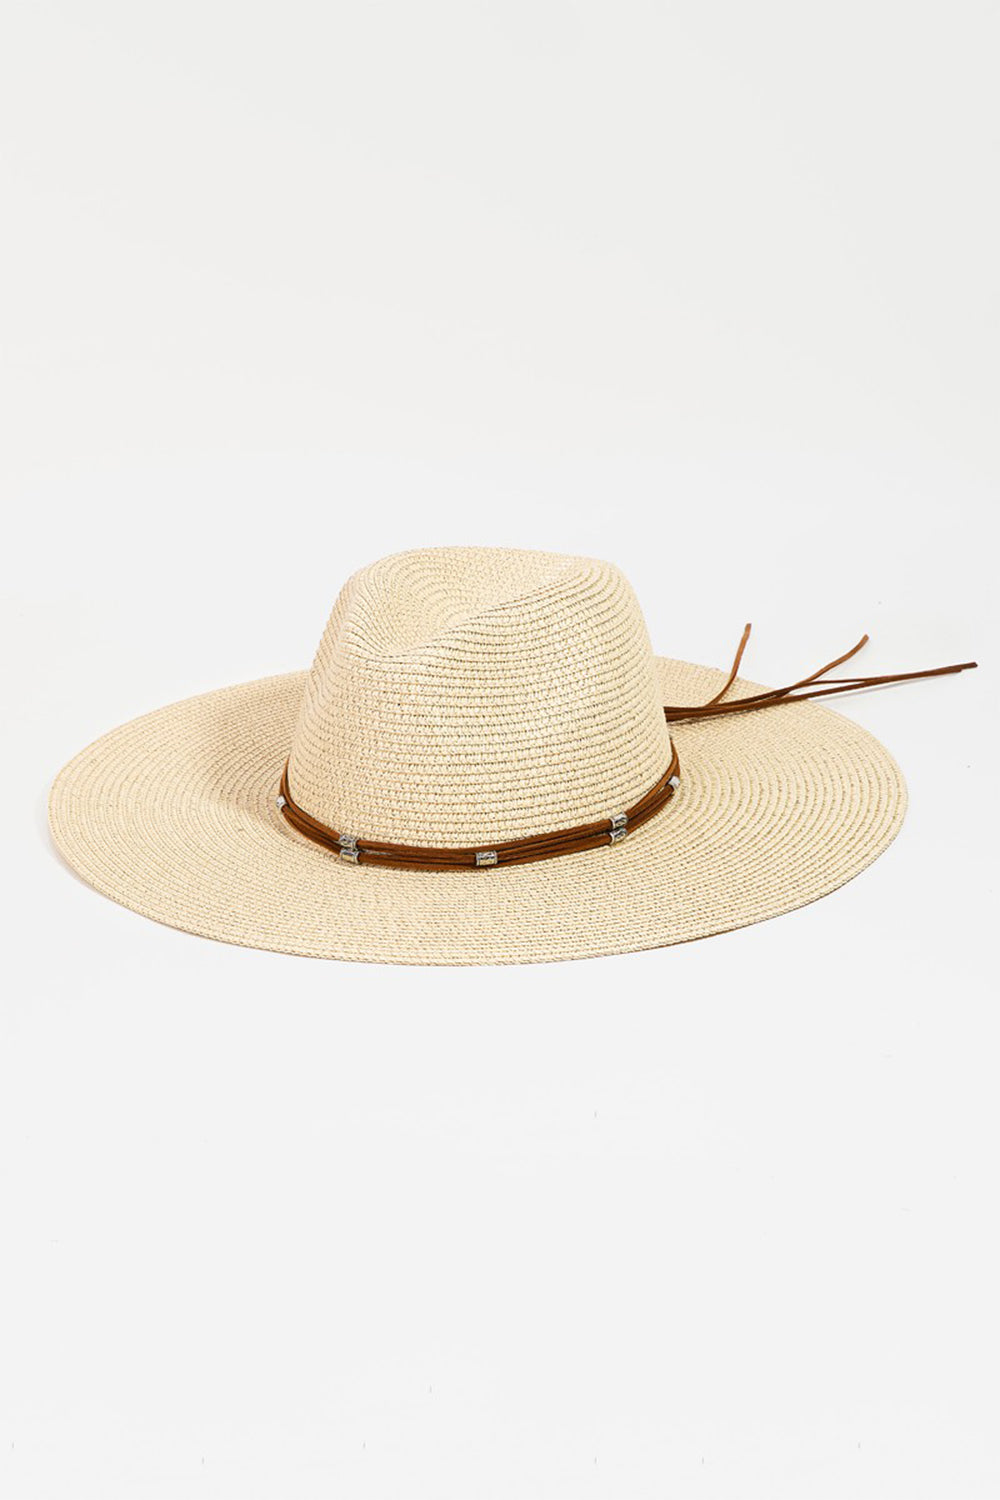 Fame Rope Strap Wide Brim Weave Hat IV One Size